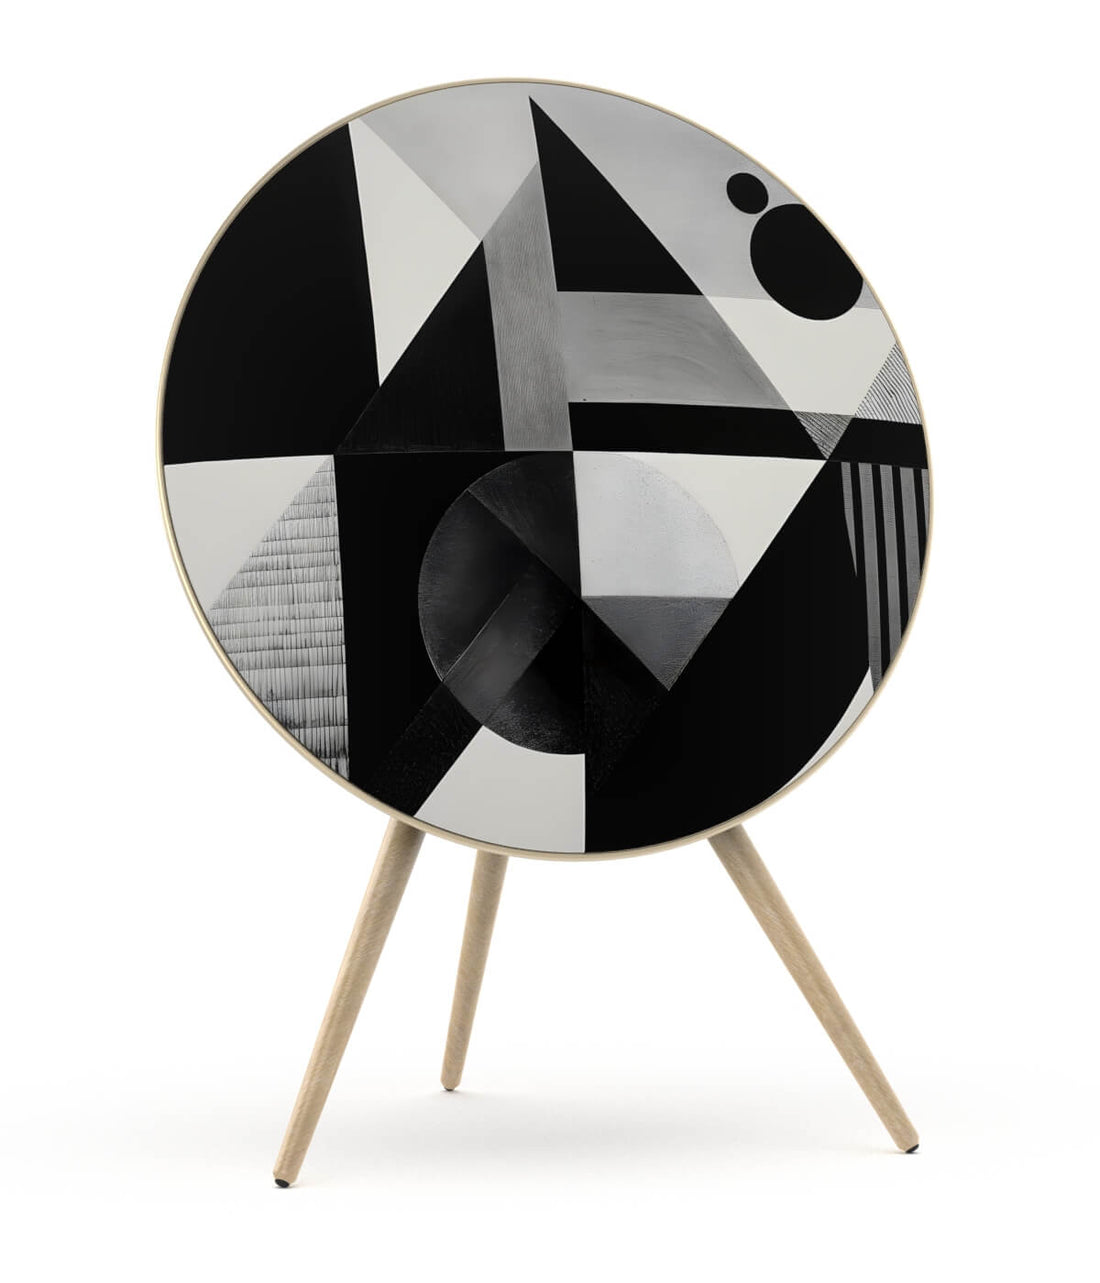 Skiniplay cover Micke for Bang & Olufsen Beoplay A9 and Beosound A9 speaker.